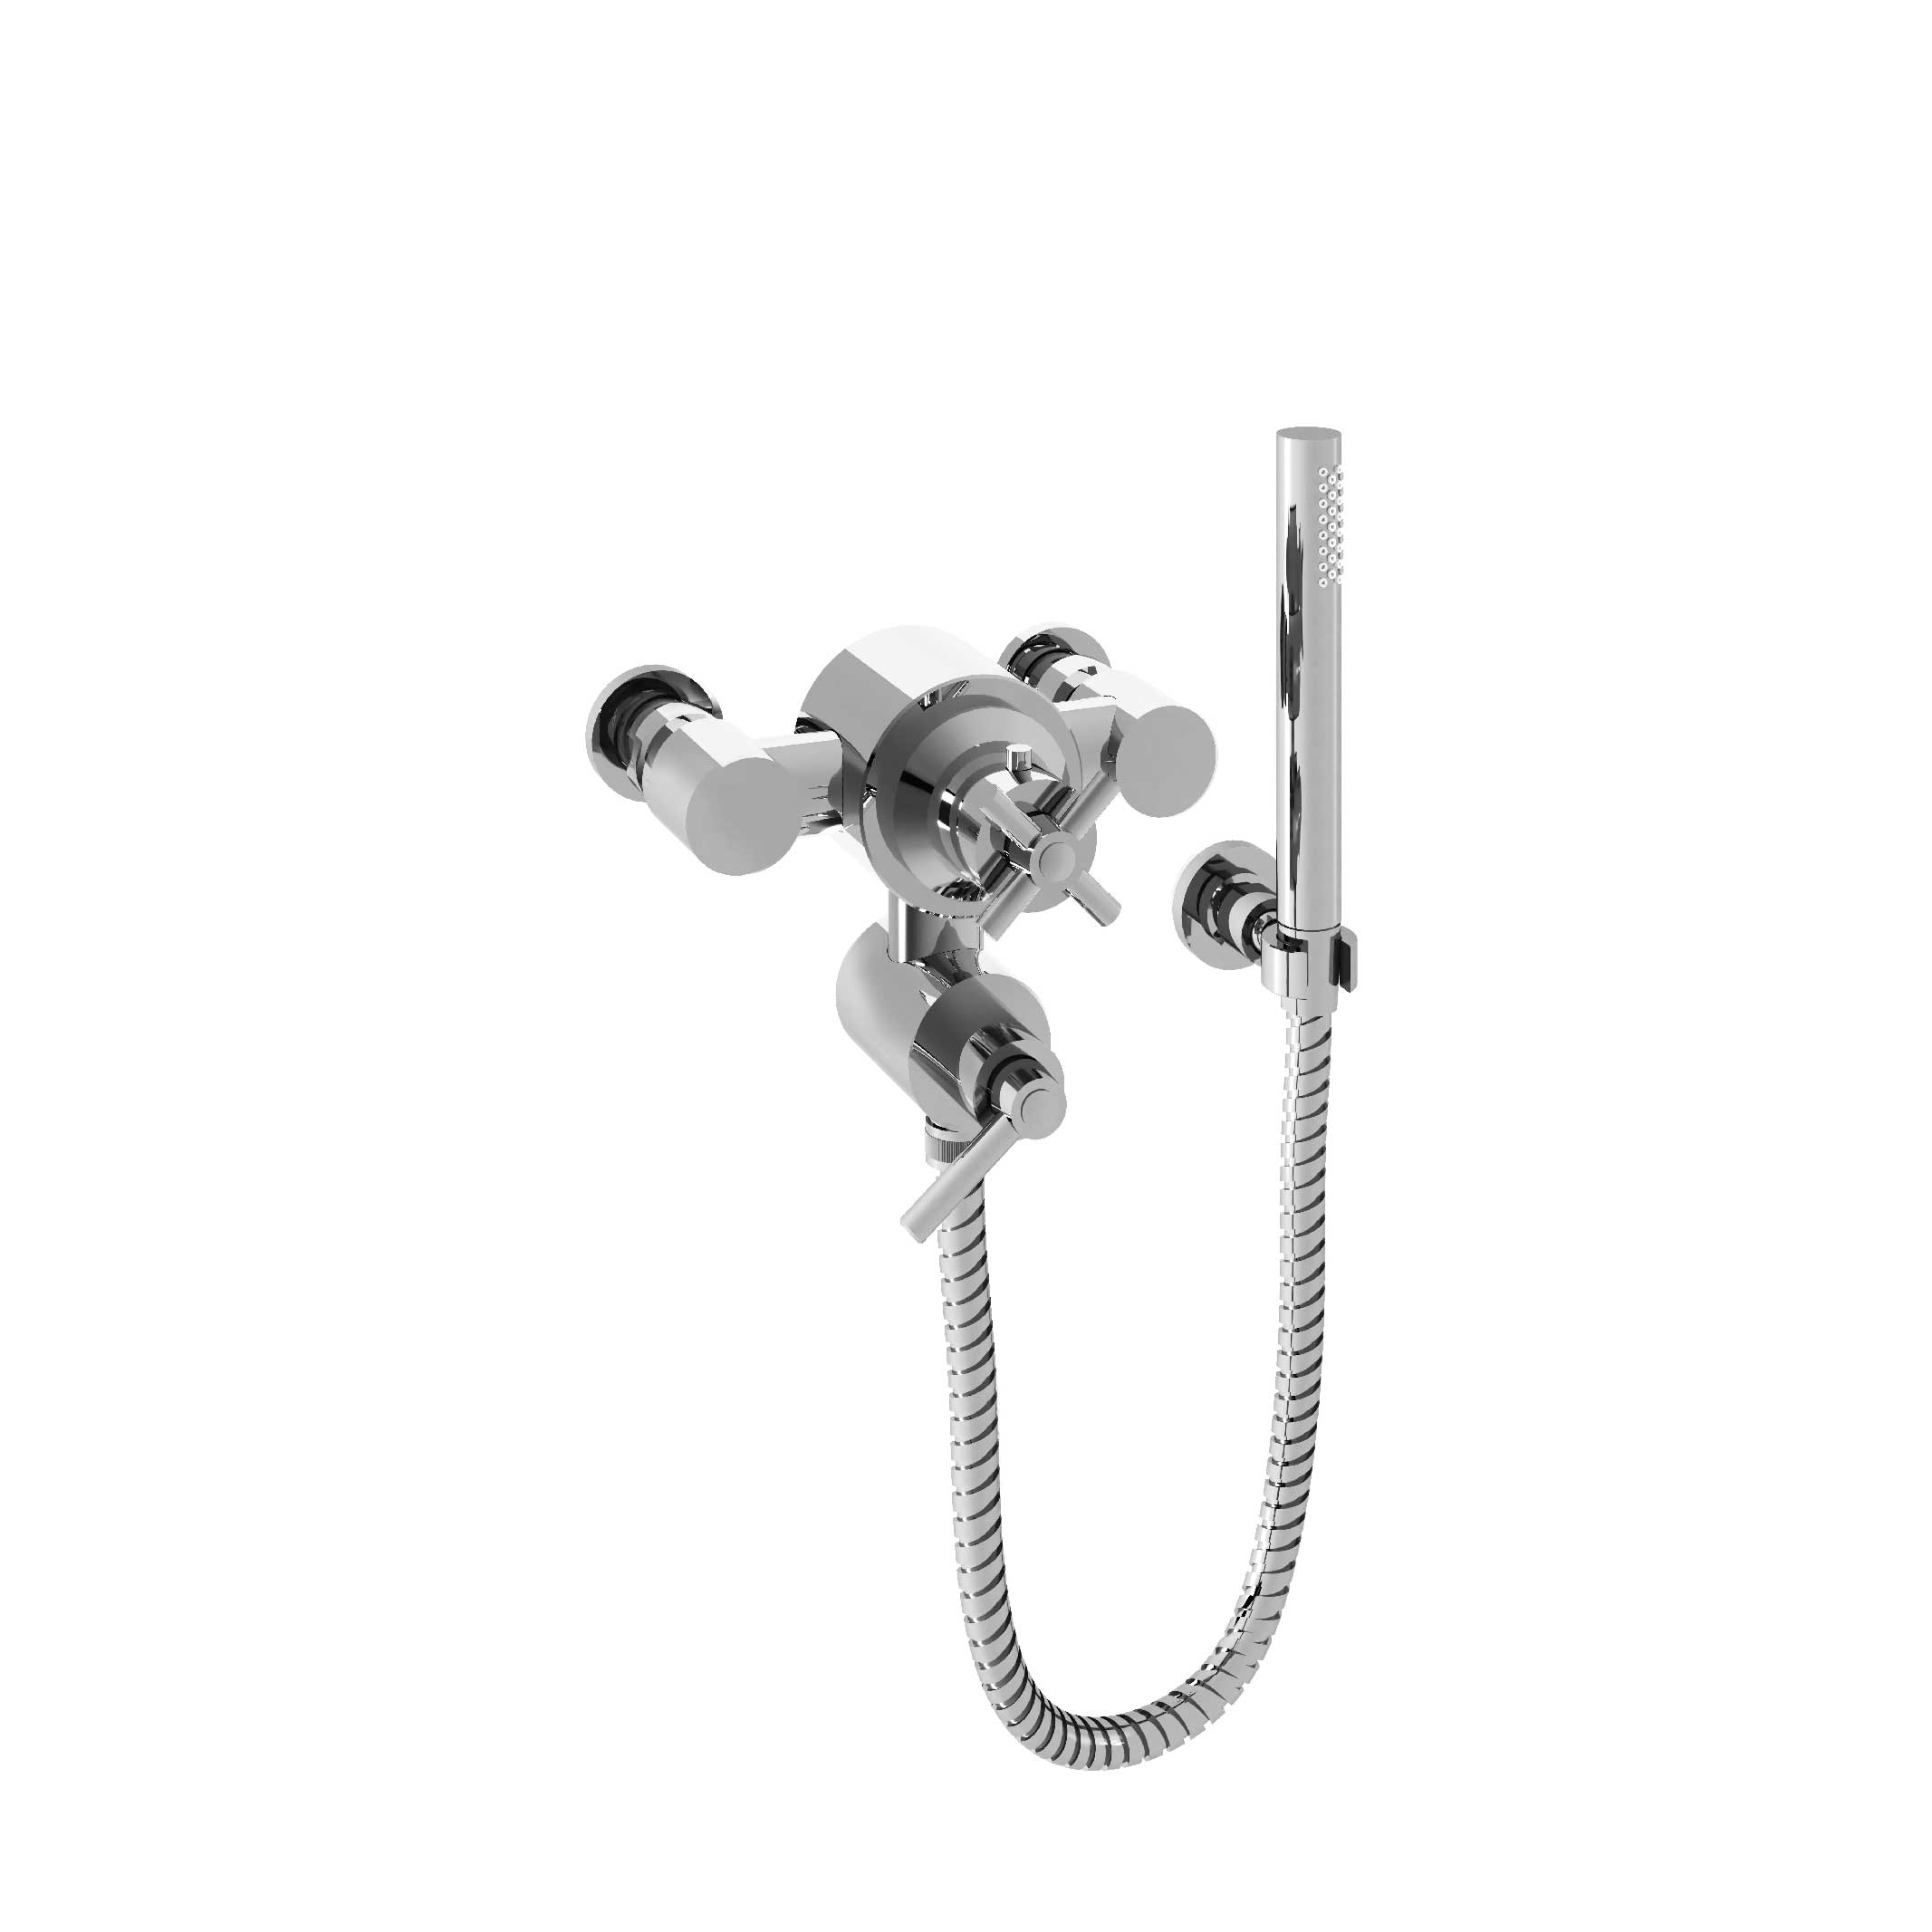 M91-2201T Thermostatic shower mixer with hook